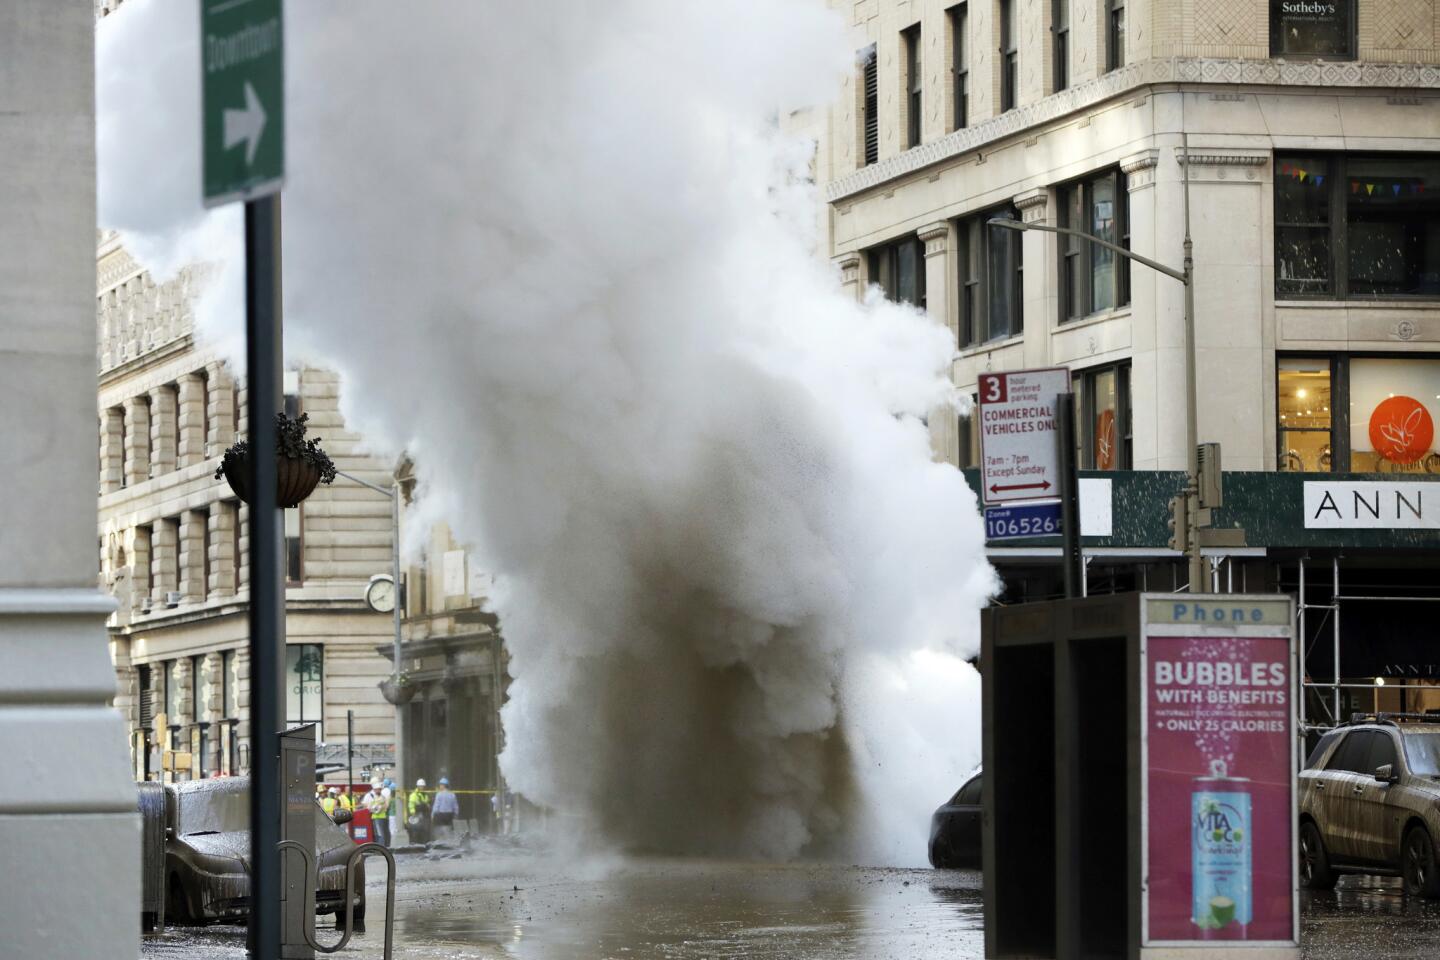 A steam pipe exploded beneath Fifth Avenue in Manhattan early Thursday, sending chunks of asphalt flying, a geyser of billowing white steam stories into the air and forcing pedestrians to take cover.